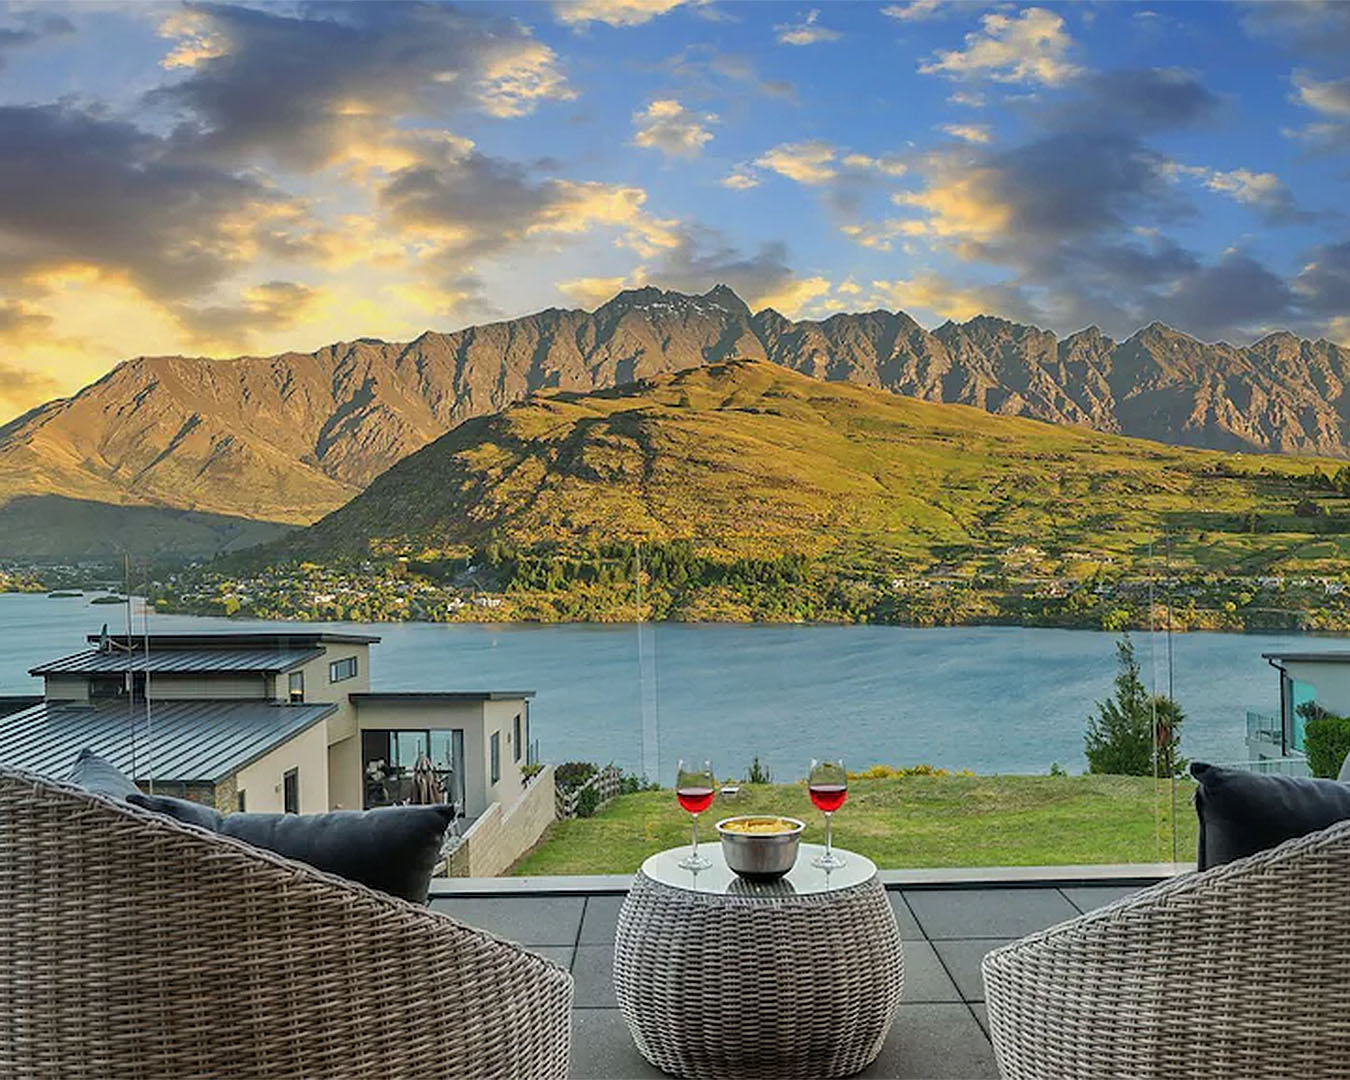 A few seats and glasses of wine overlook stunning mountain views.